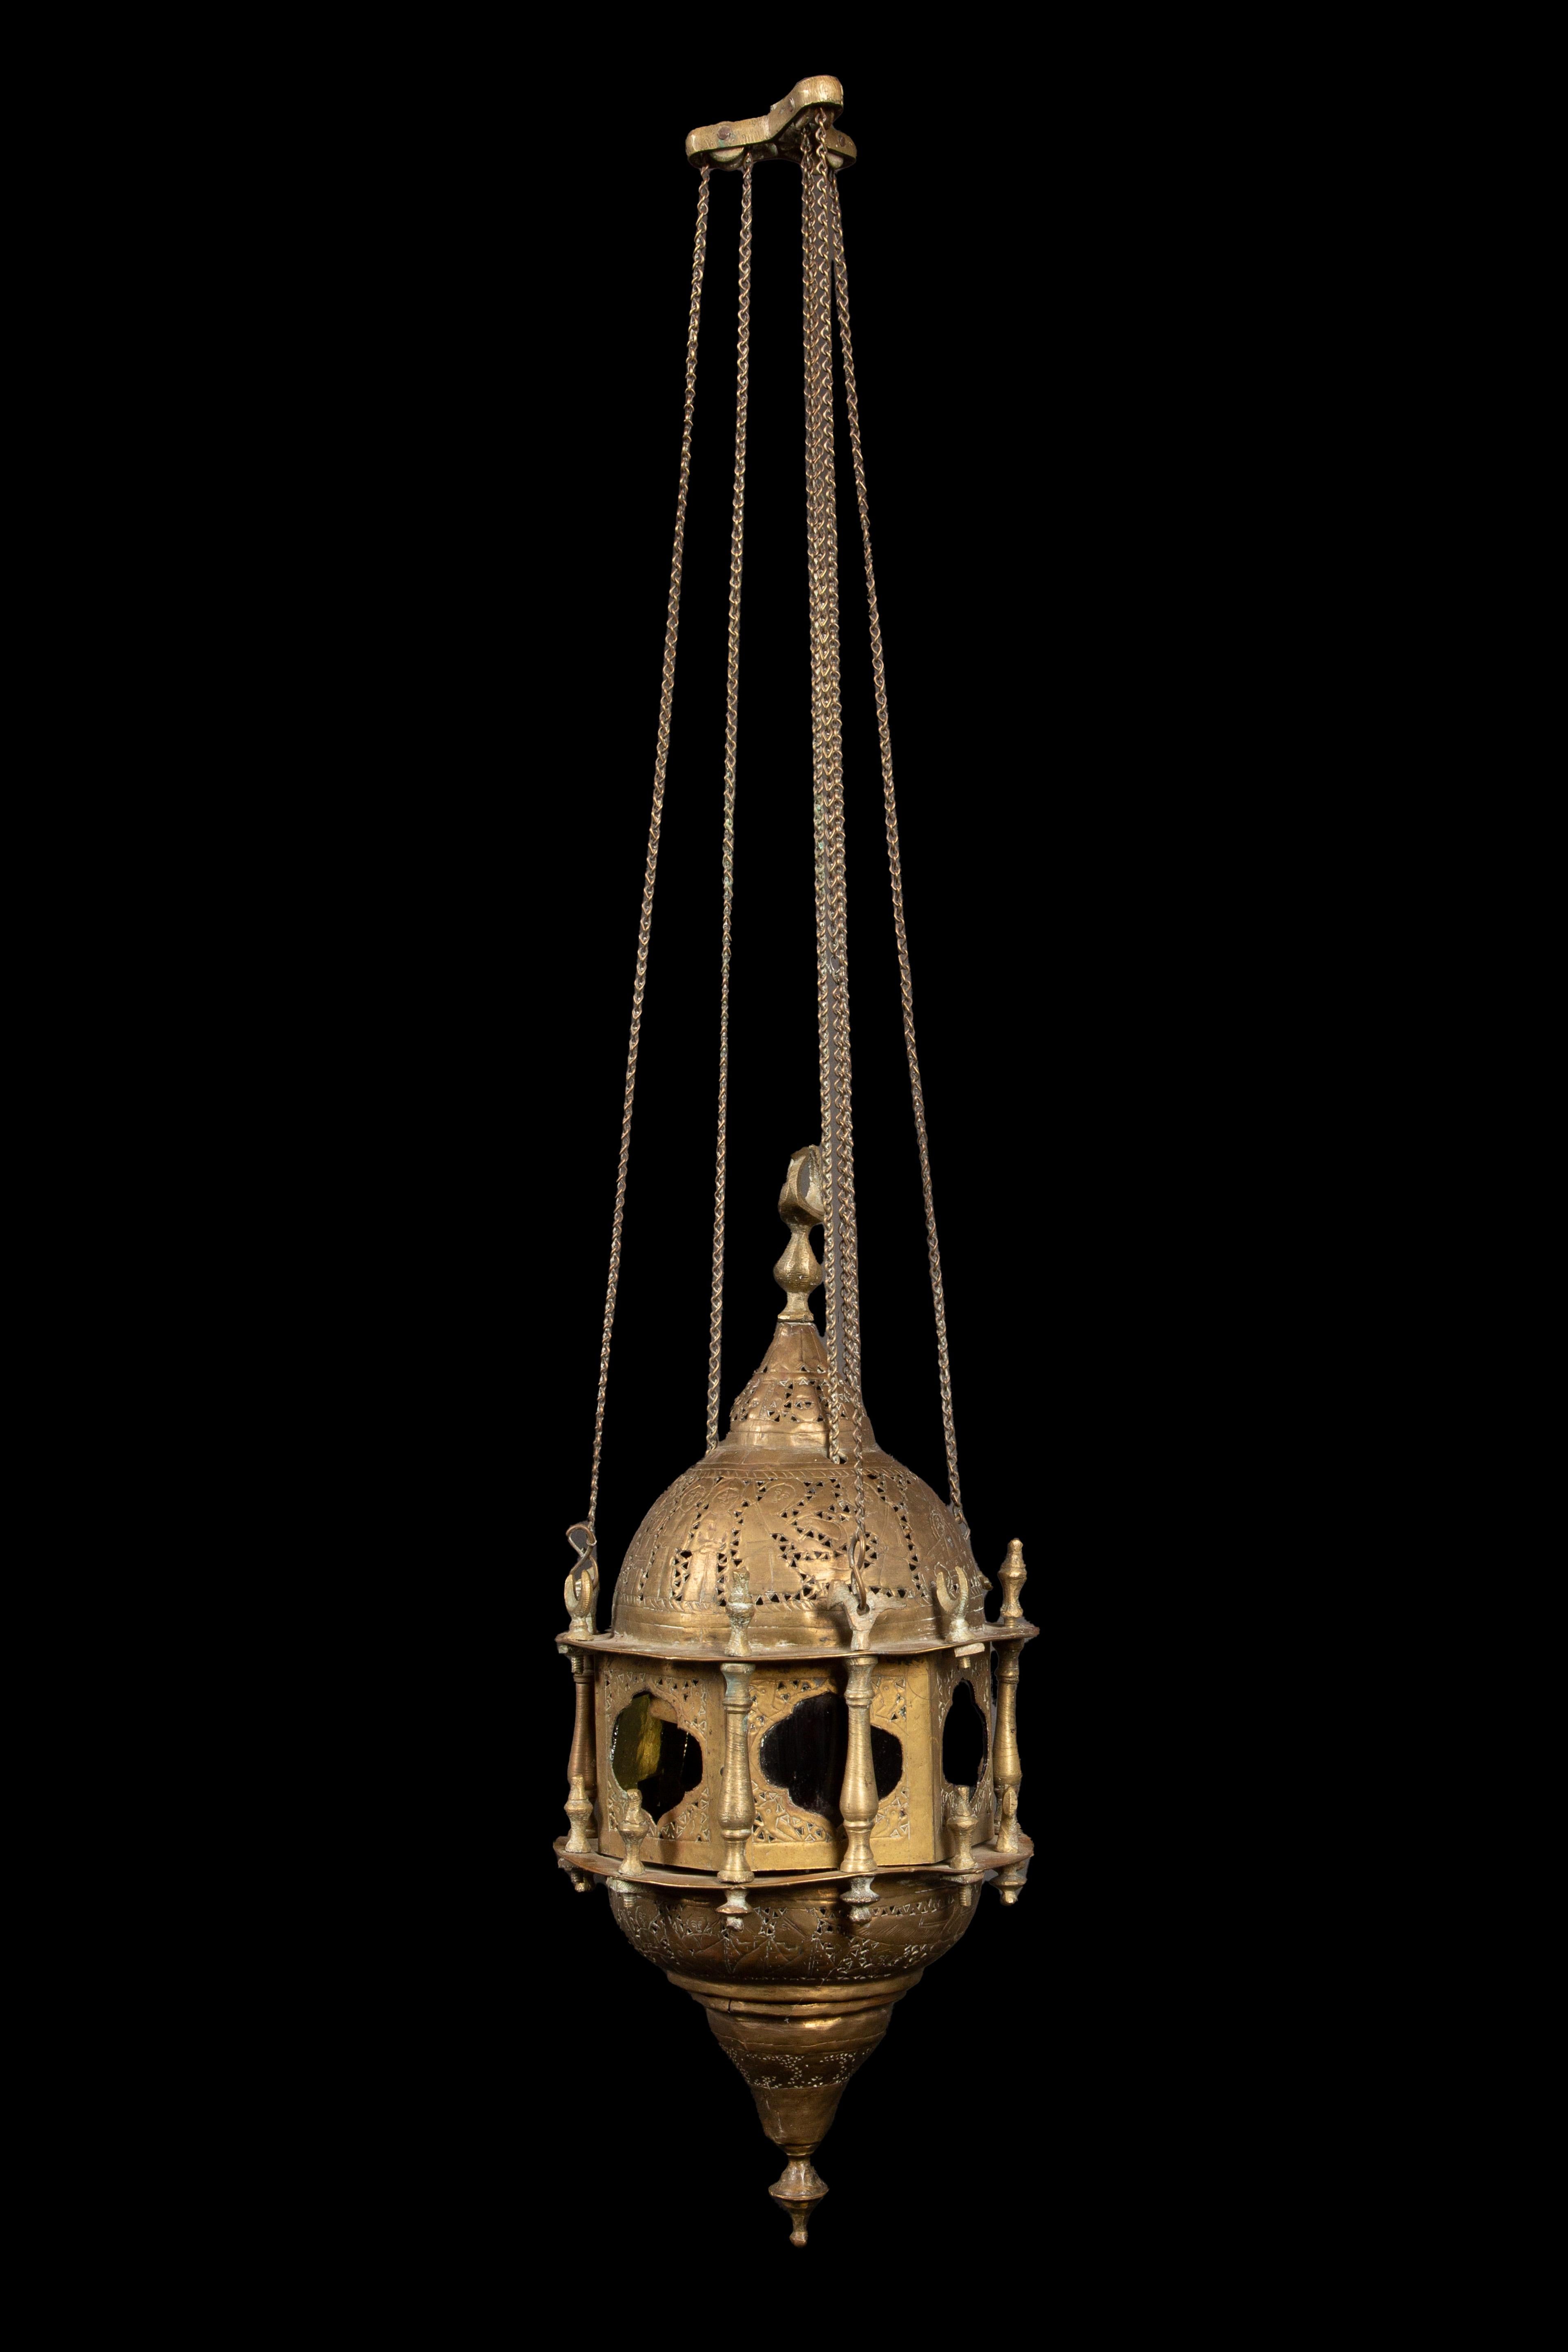 Moroccan reticulated brass lantern, small, and of typical form with pierced domed top suspended from a canopy by chains, and with multicolored glass-paned sides separated by colonnettes. 31